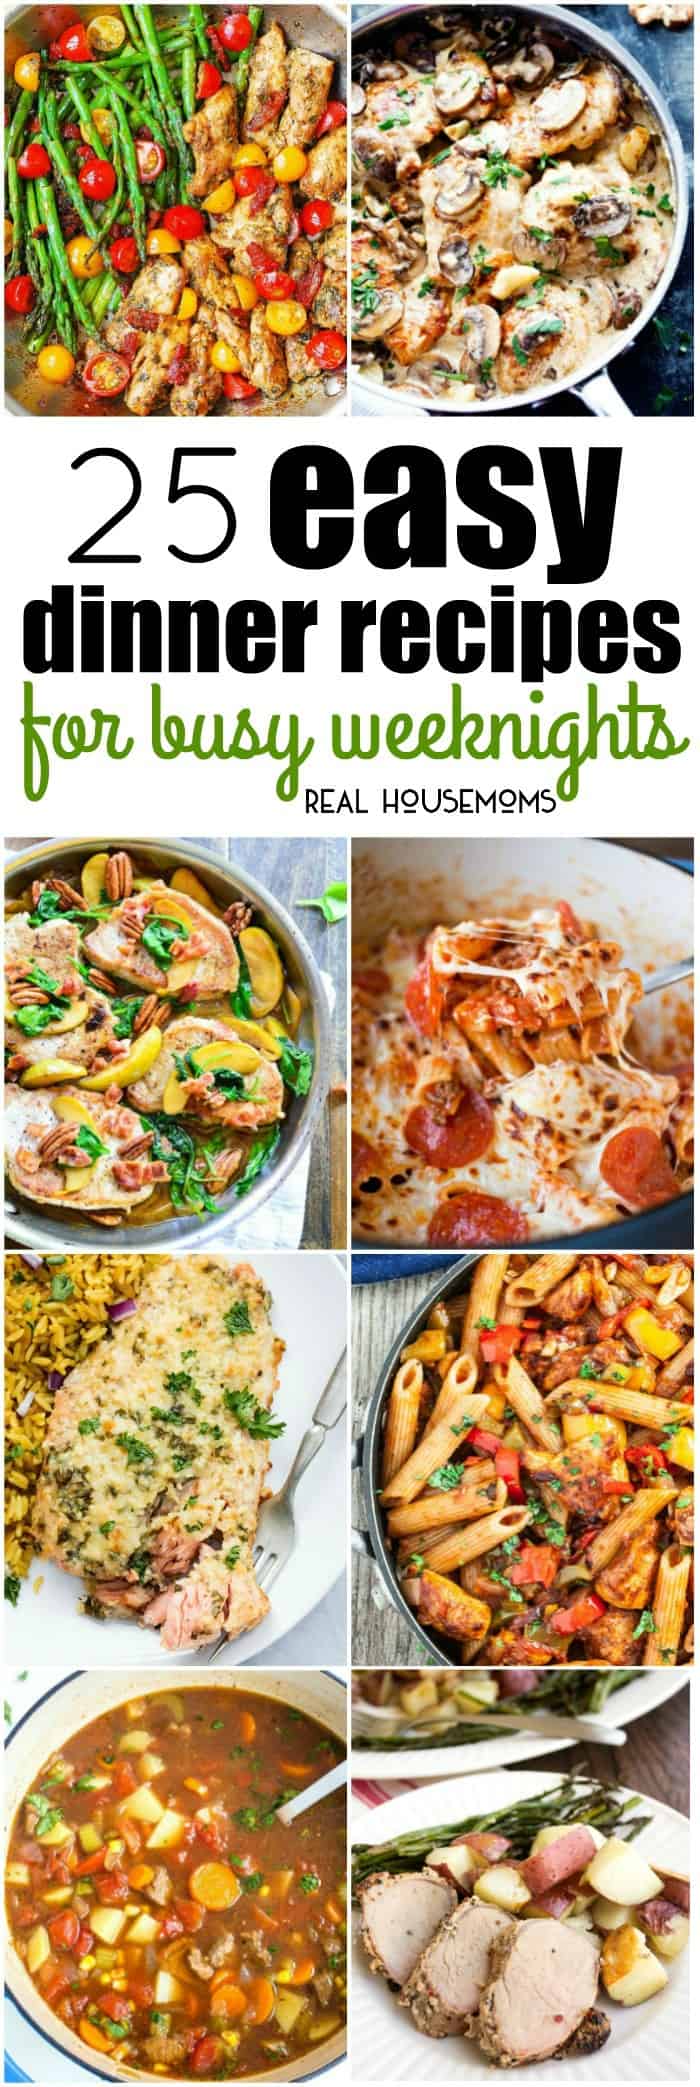 Getting a homecooked meal on the table doesn't have to be hard. These 25 Easy Dinner Recipes for Busy Weeknights are delicious and always a hit with the family!